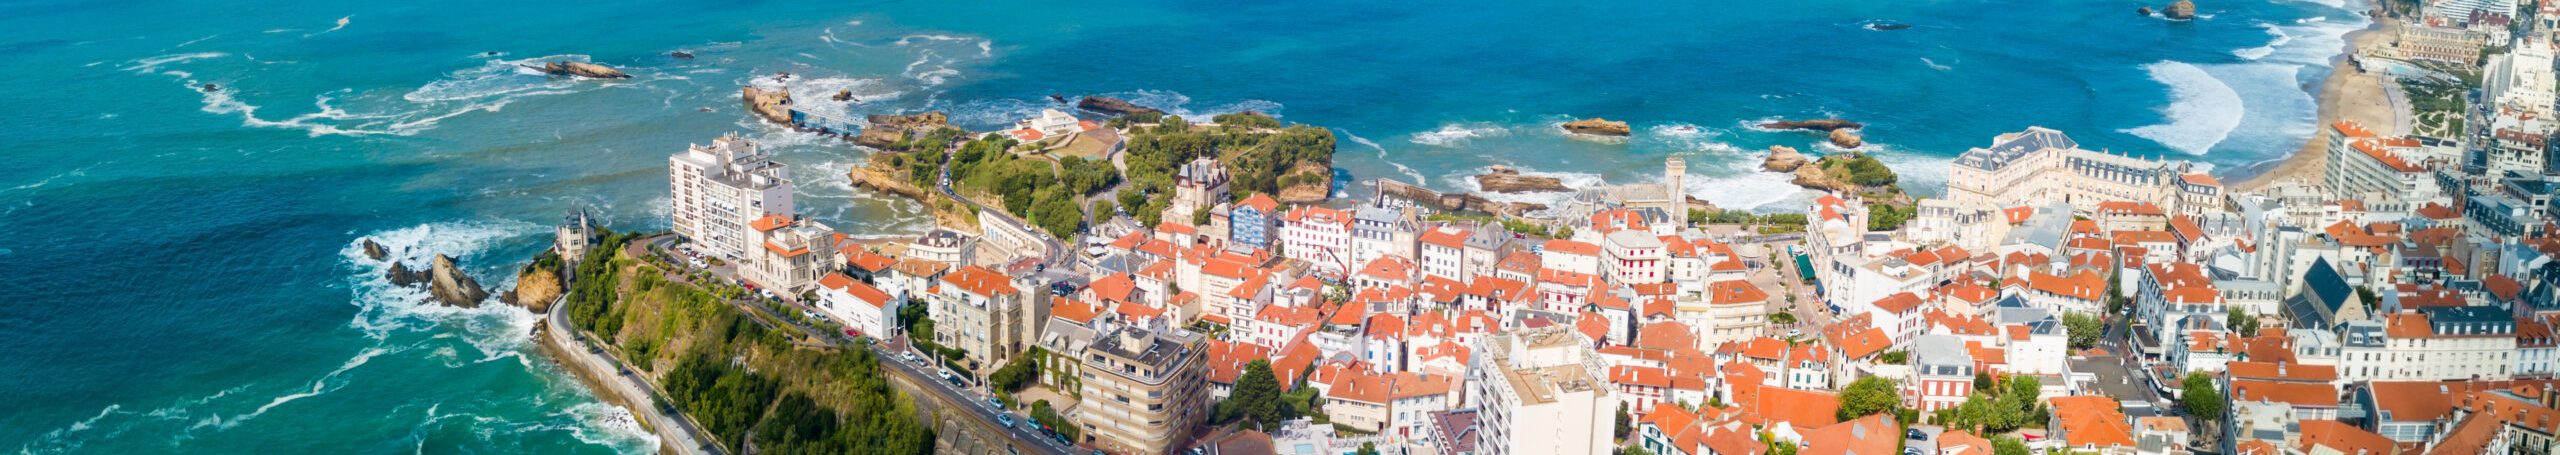 Biarritz,Aerial,Panoramic,View.,Biarritz,Is,A,City,On,The